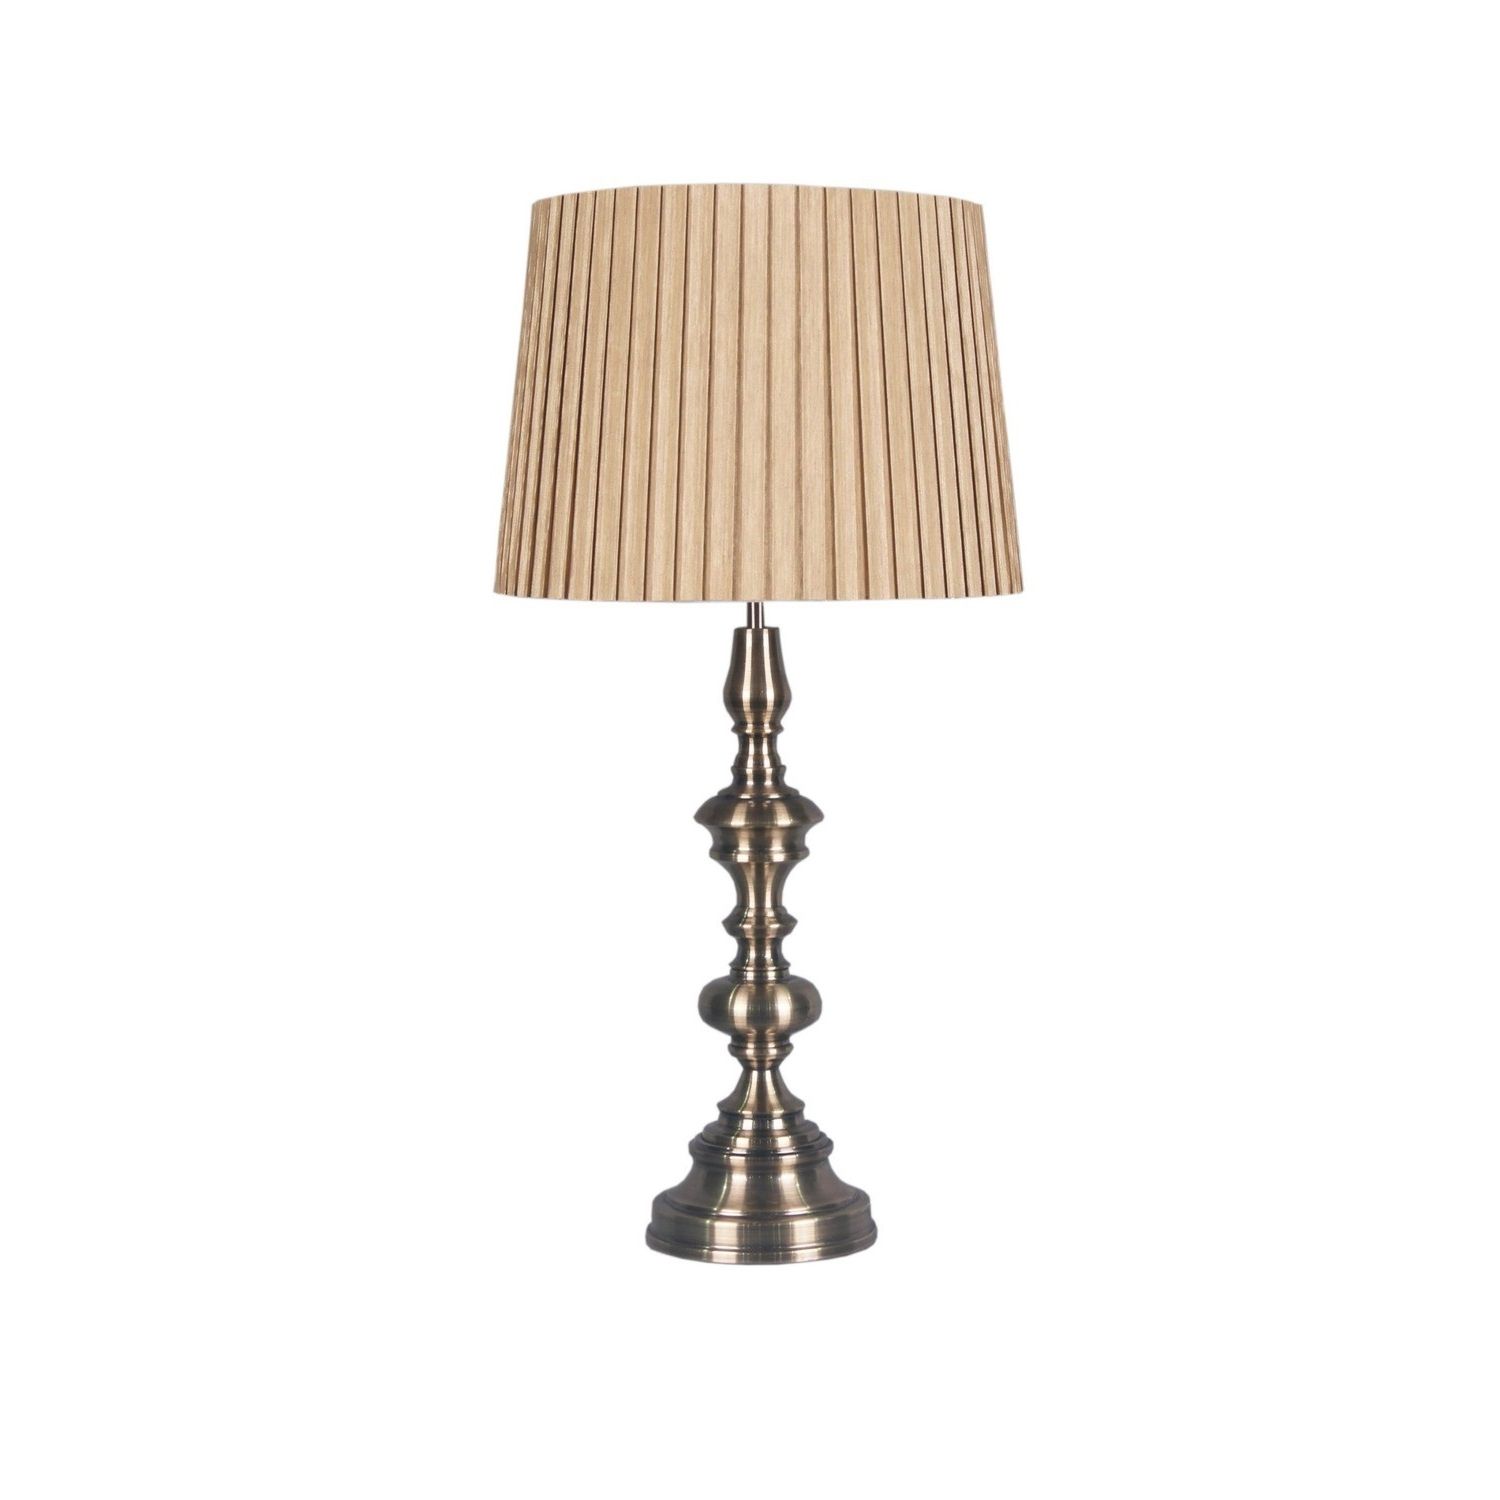 Most Recent John Lewis Table Lamps For Living Room With Light : Tiffany Table Lamp Shade Replacements Floor Shades Only John (Photo 13 of 15)